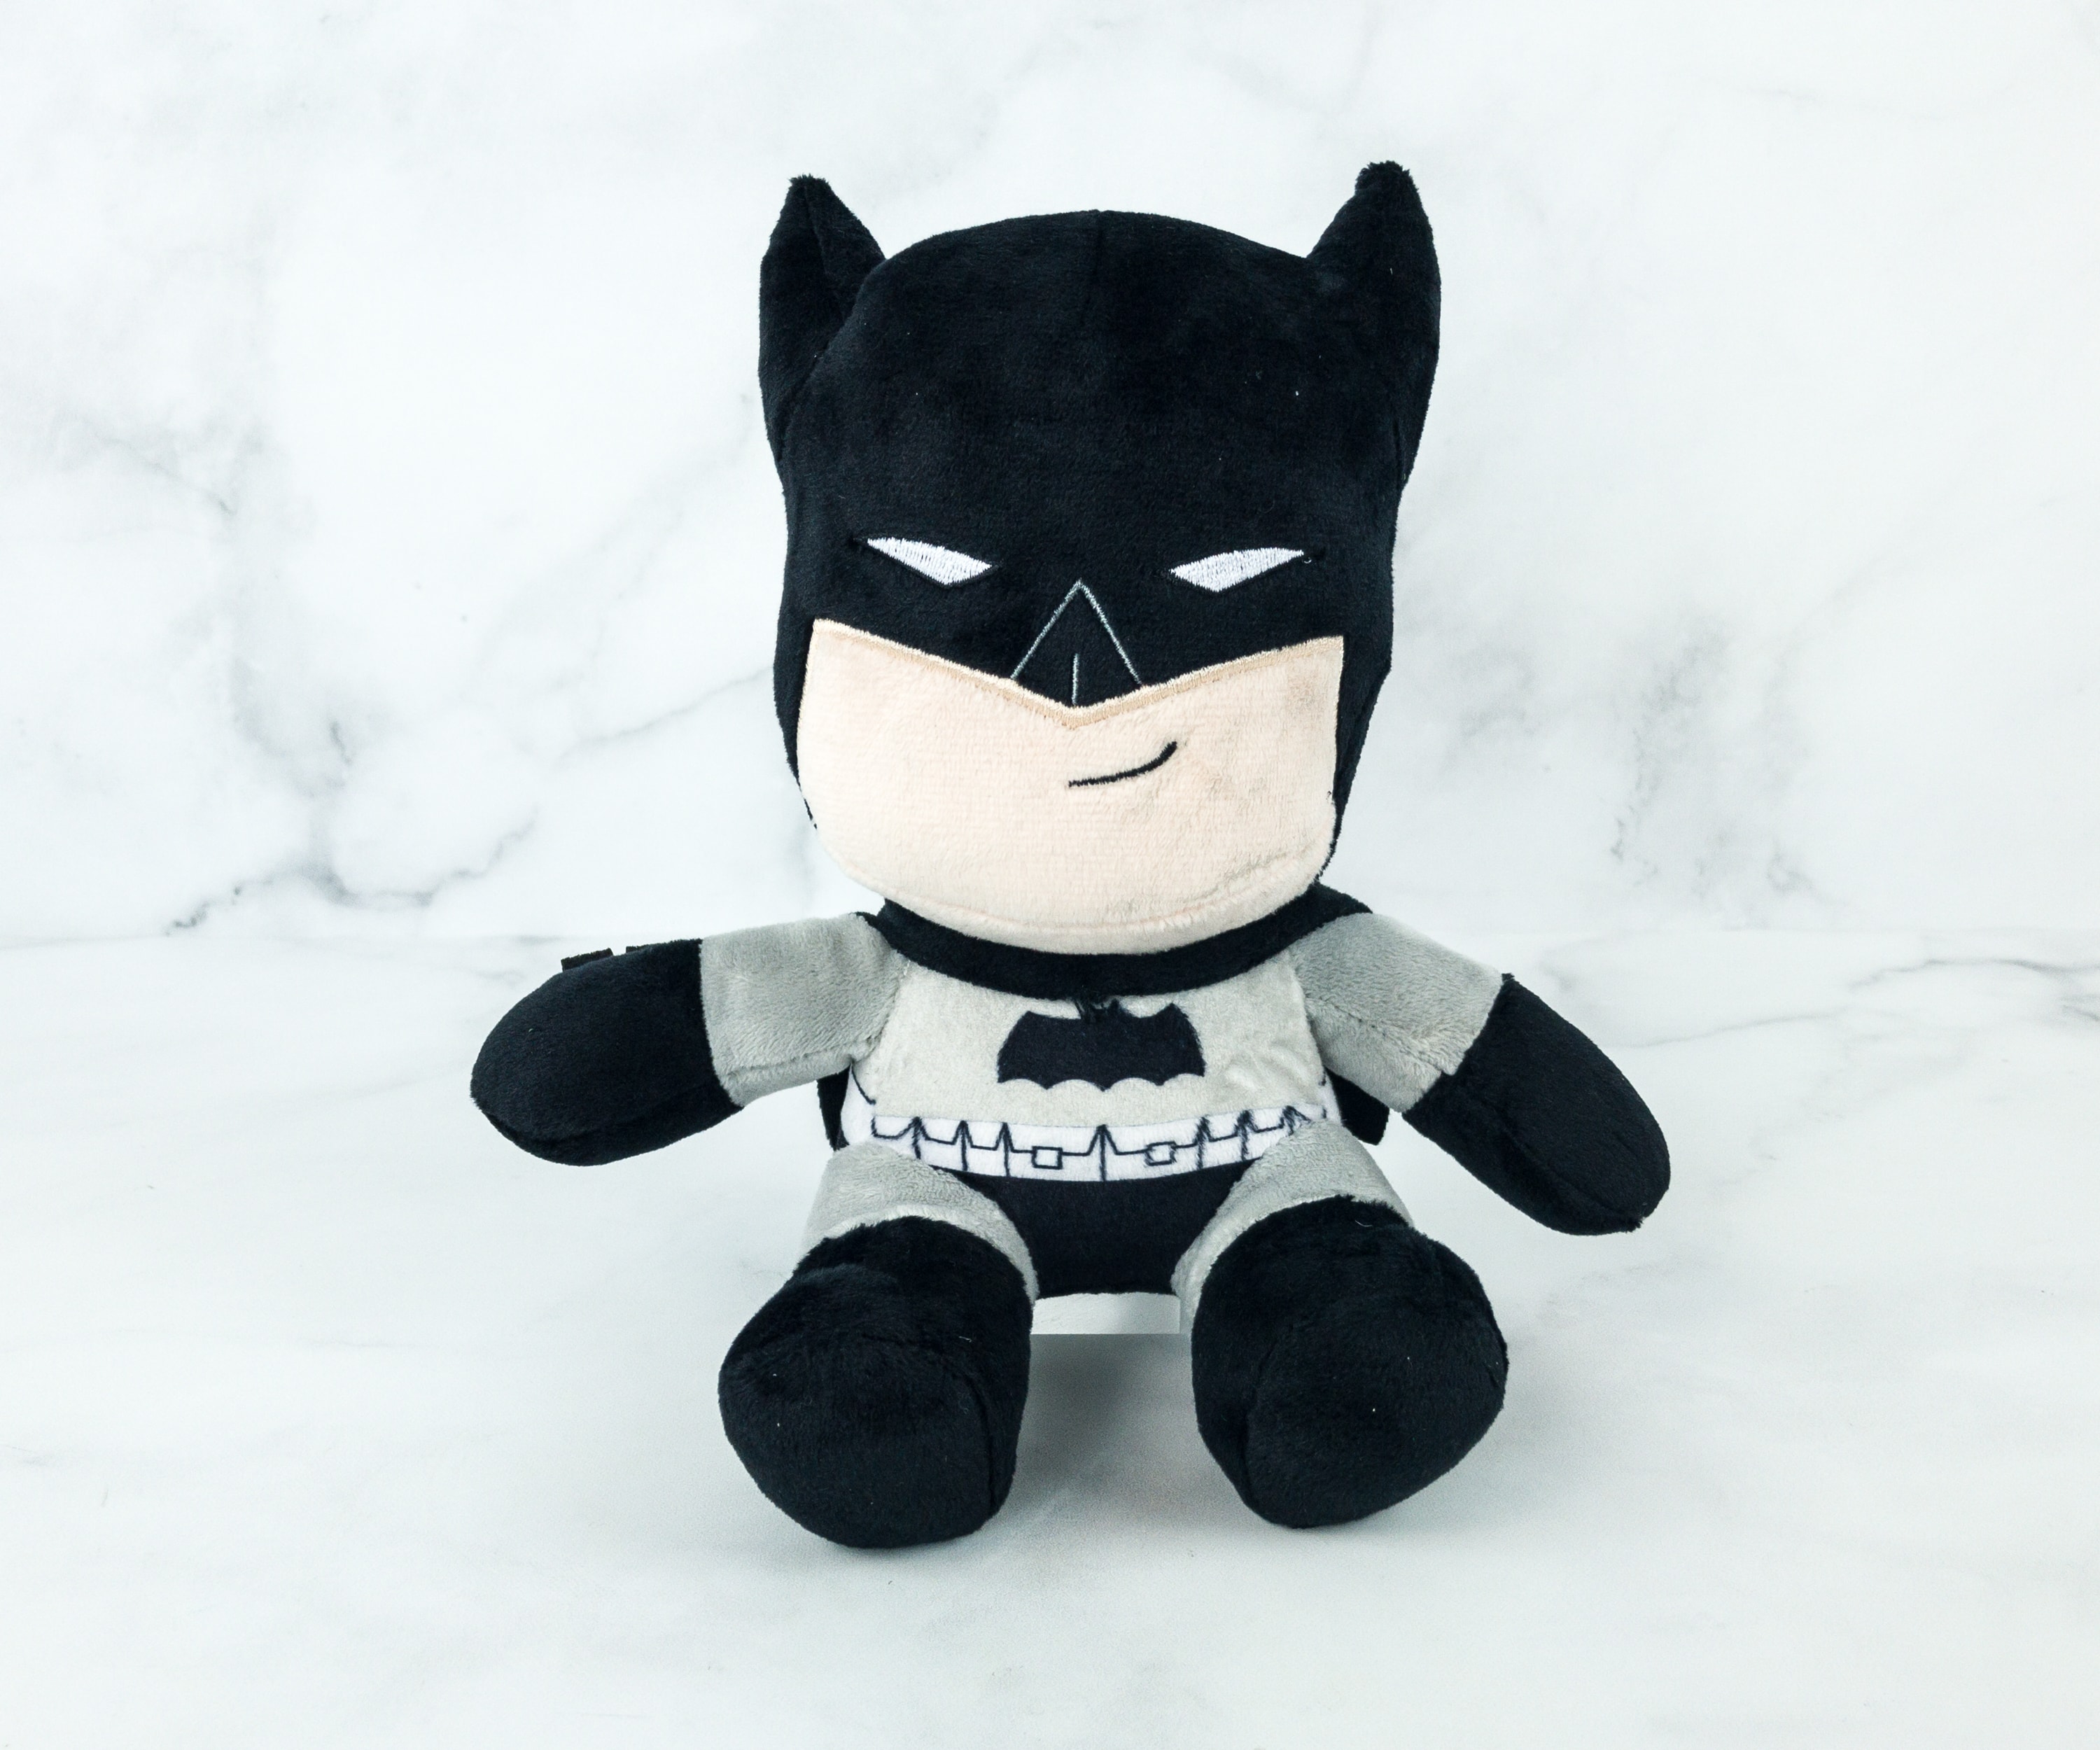 JUSTICE LEAGUE Dark Knight Batman Plush Loot Crate DX DC TAKEOVER December 2018 